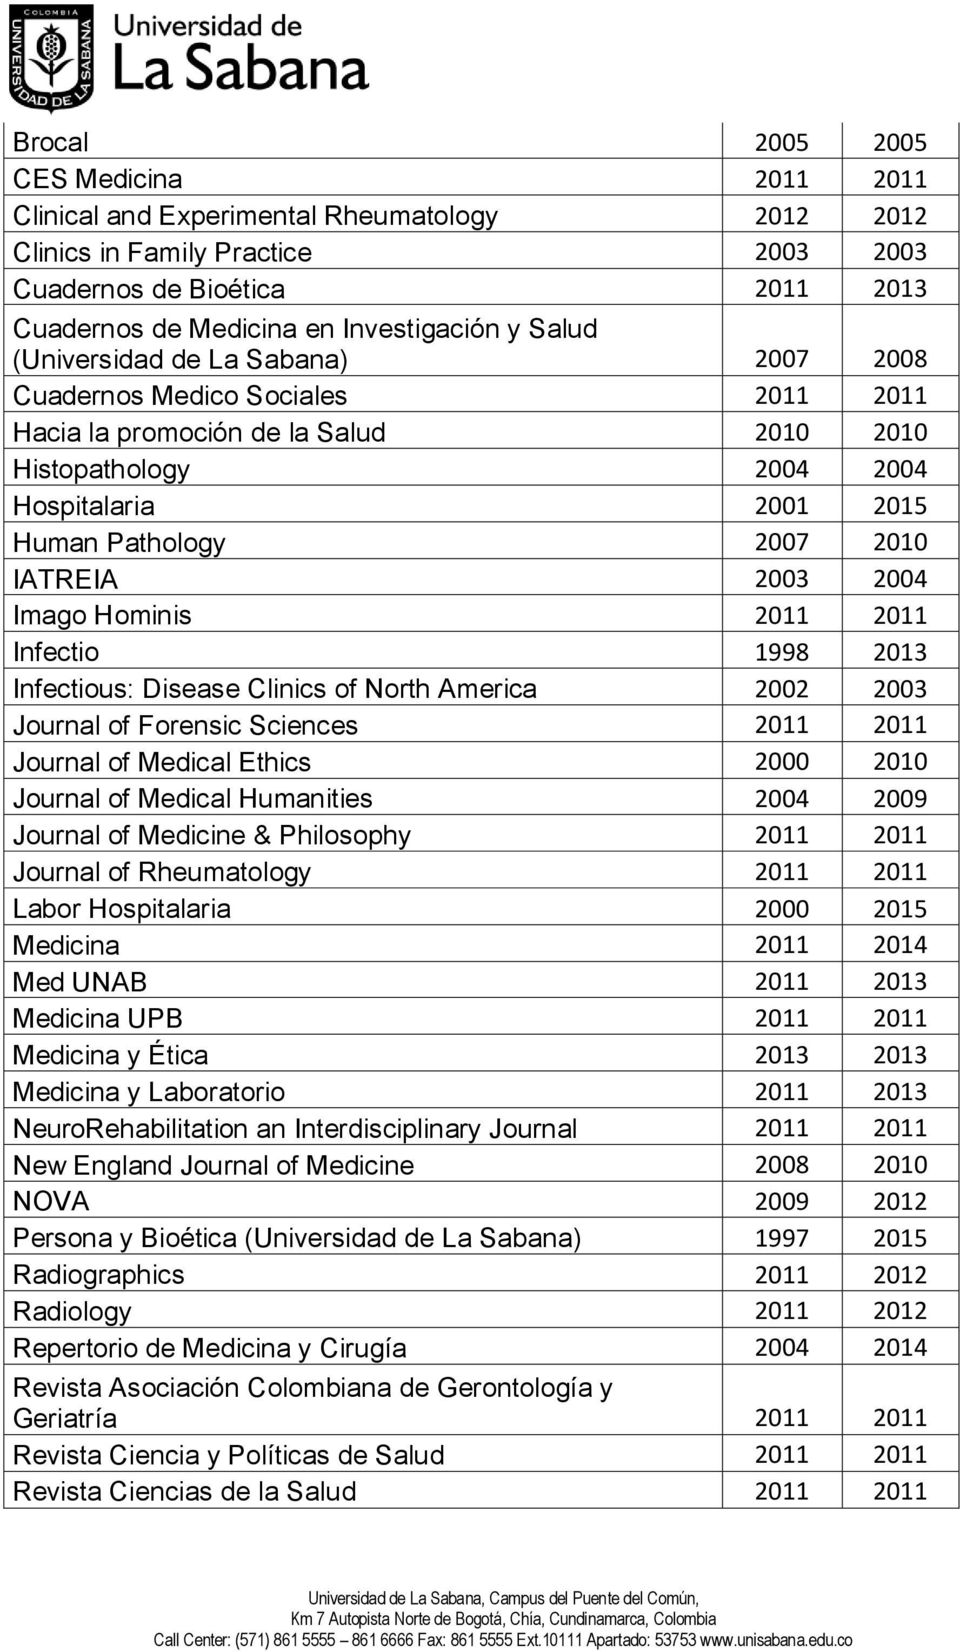 IATREIA 2003 2004 Imago Hominis 2011 2011 Infectio 1998 2013 Infectious: Disease Clinics of North America 2002 2003 Journal of Forensic Sciences 2011 2011 Journal of Medical Ethics 2000 2010 Journal